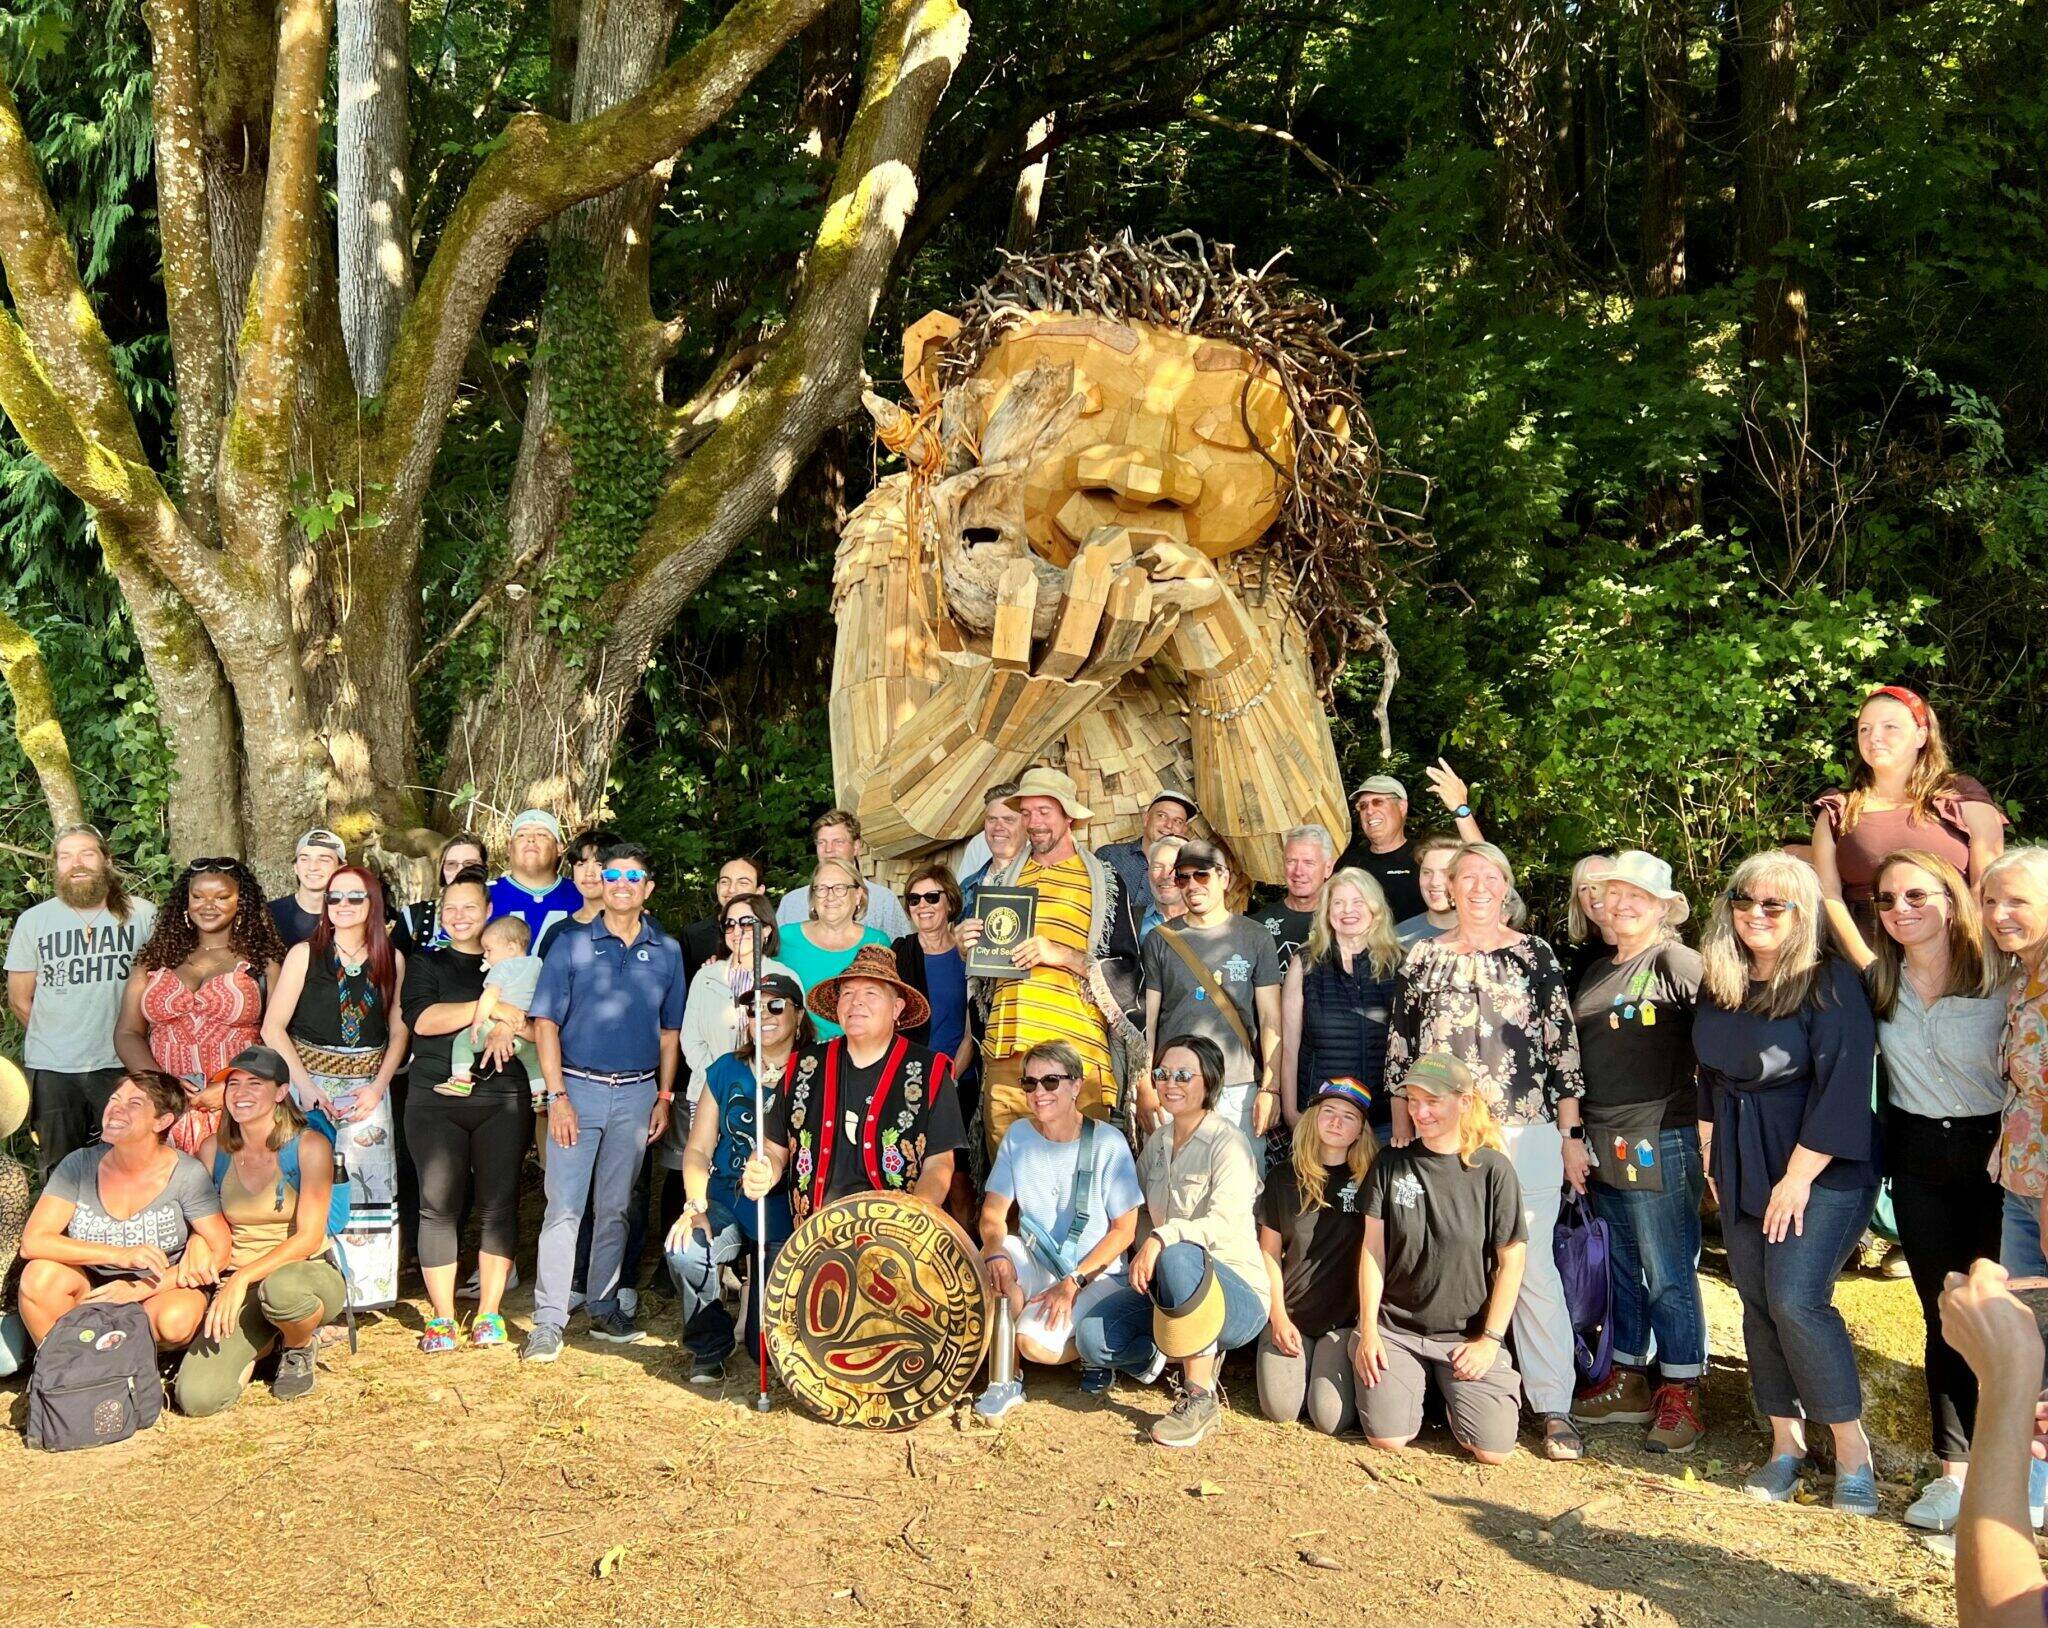 Bruun Idun with volunteers, Thomas Dambo and Coyote. (Photo Courtesy of the City of Seattle)